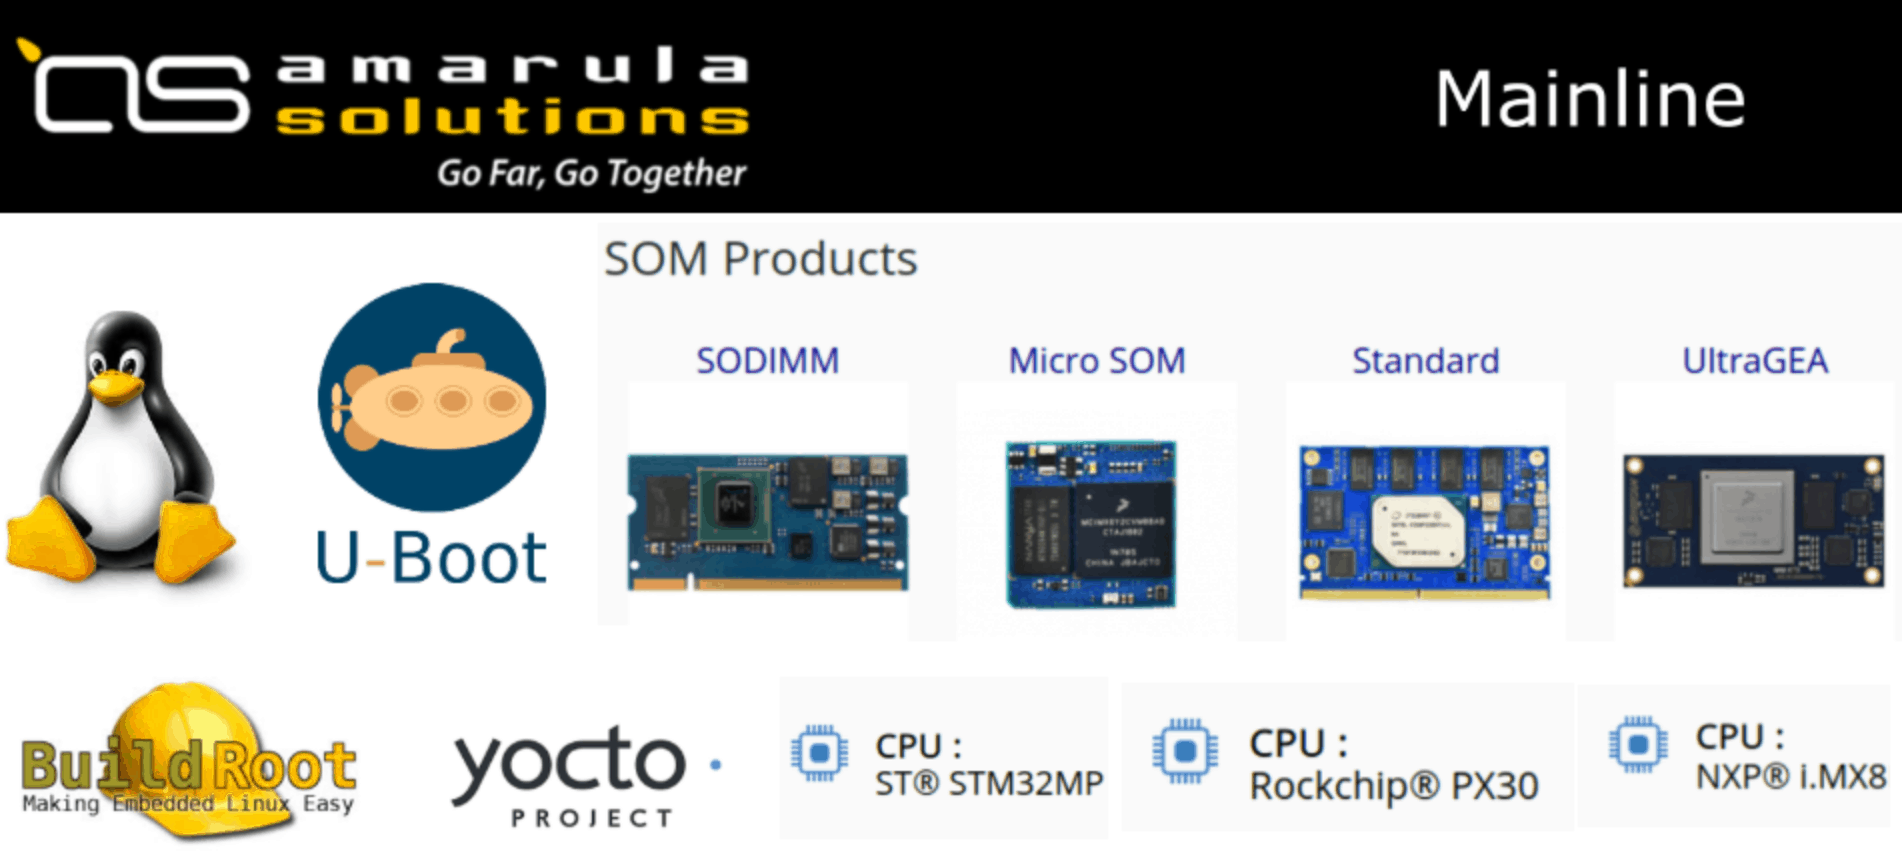 Amarula solutions. Go far, go together. Mainline Project: Linux, U-Boot, BuildRoot, Yocto. SOM products: SODIMM, Miceo SOM, Utra GEA, CPU ST STM32MP, CPU ROCKCHIP PX30, CPU NXP i.MX8.